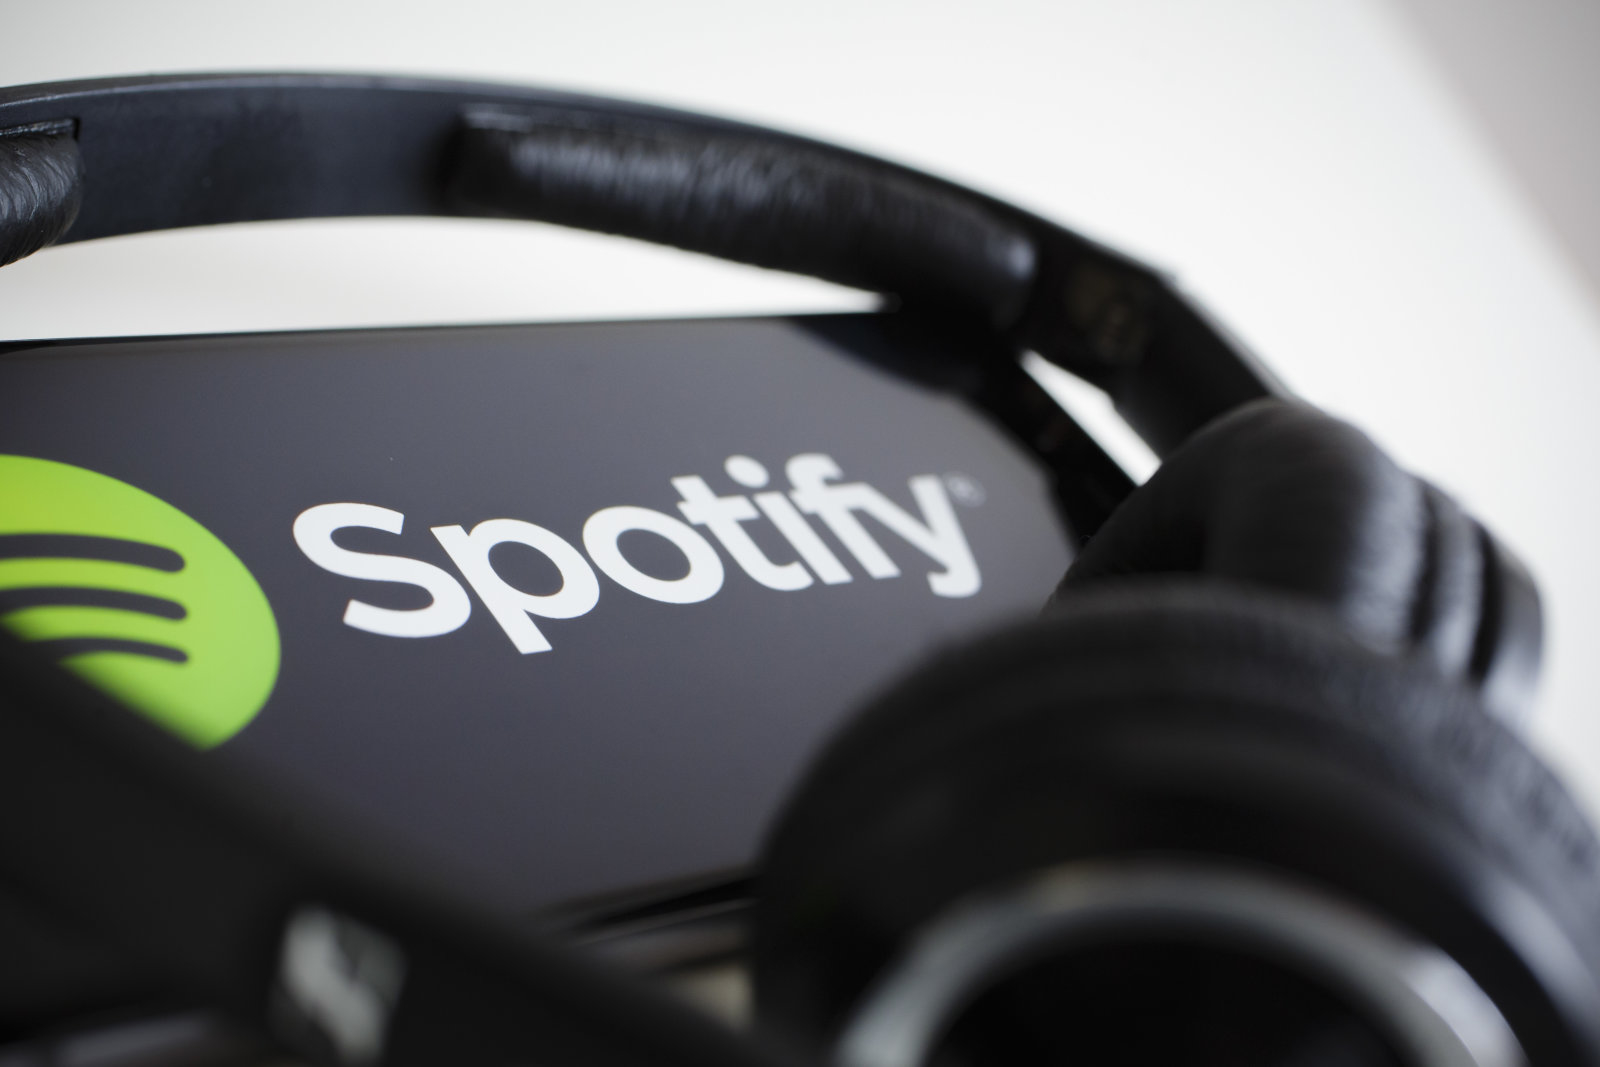 Digital Songwriter/Producer Credits Matter; Spotify Adds Credits to Desktop App